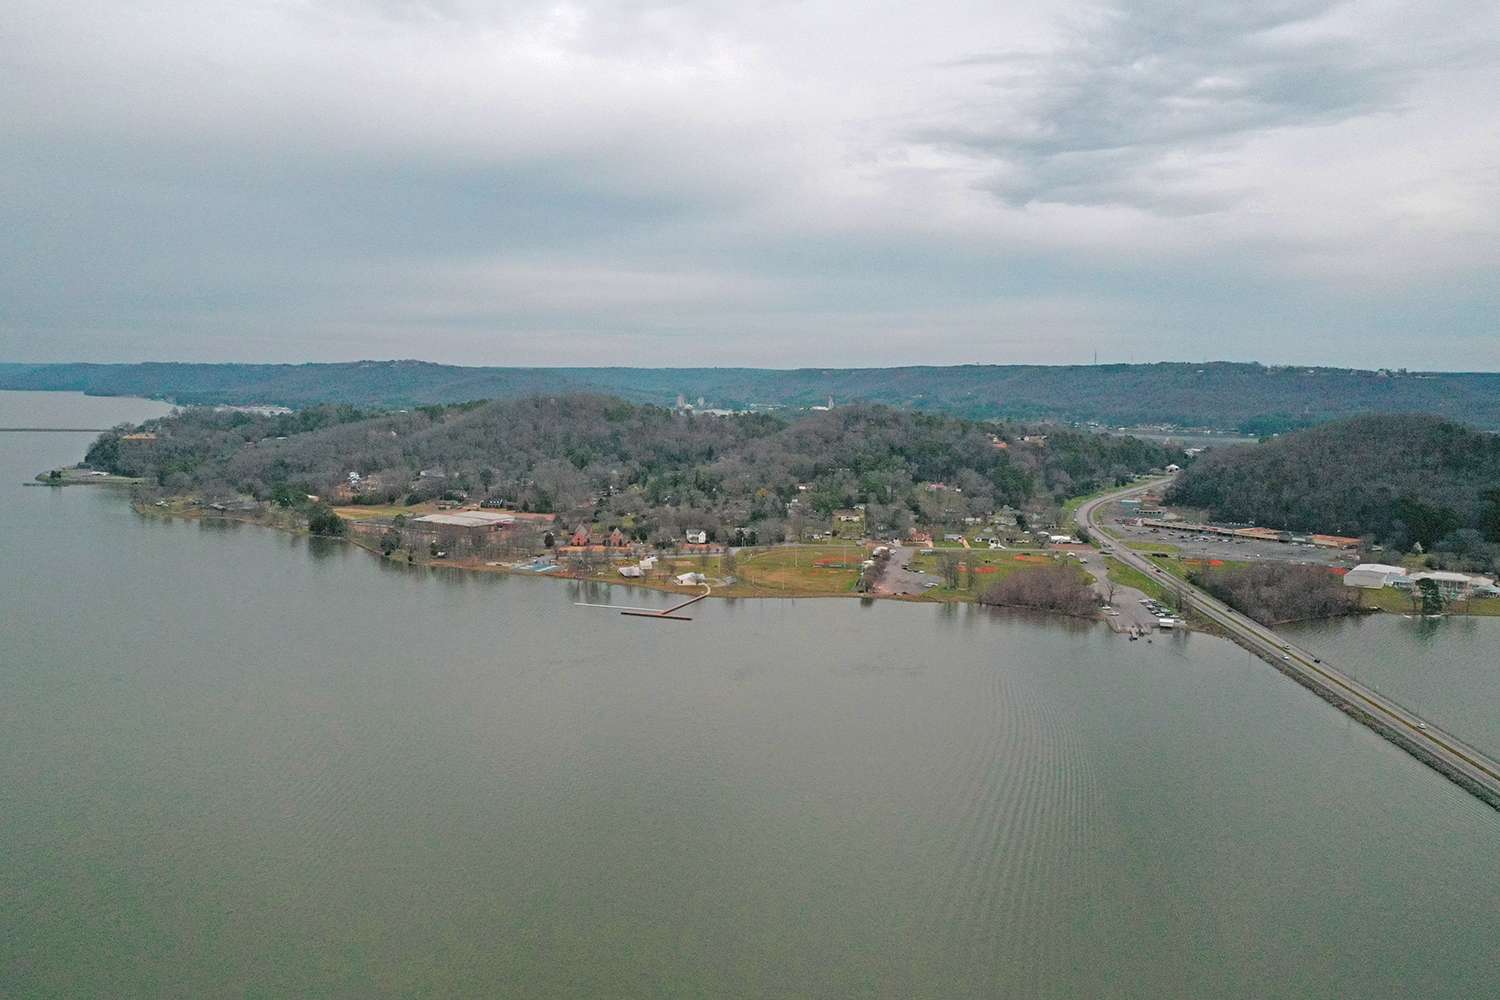 To the left is the town of Guntersville, and Civitan Park, which is where the anglers will be taking off each morning-- this is where you'll want to experience the excitement of a Classic takeoff. If you'll look closely you'll see a boat ramp near the road, where competitors will put their boats in the water. 